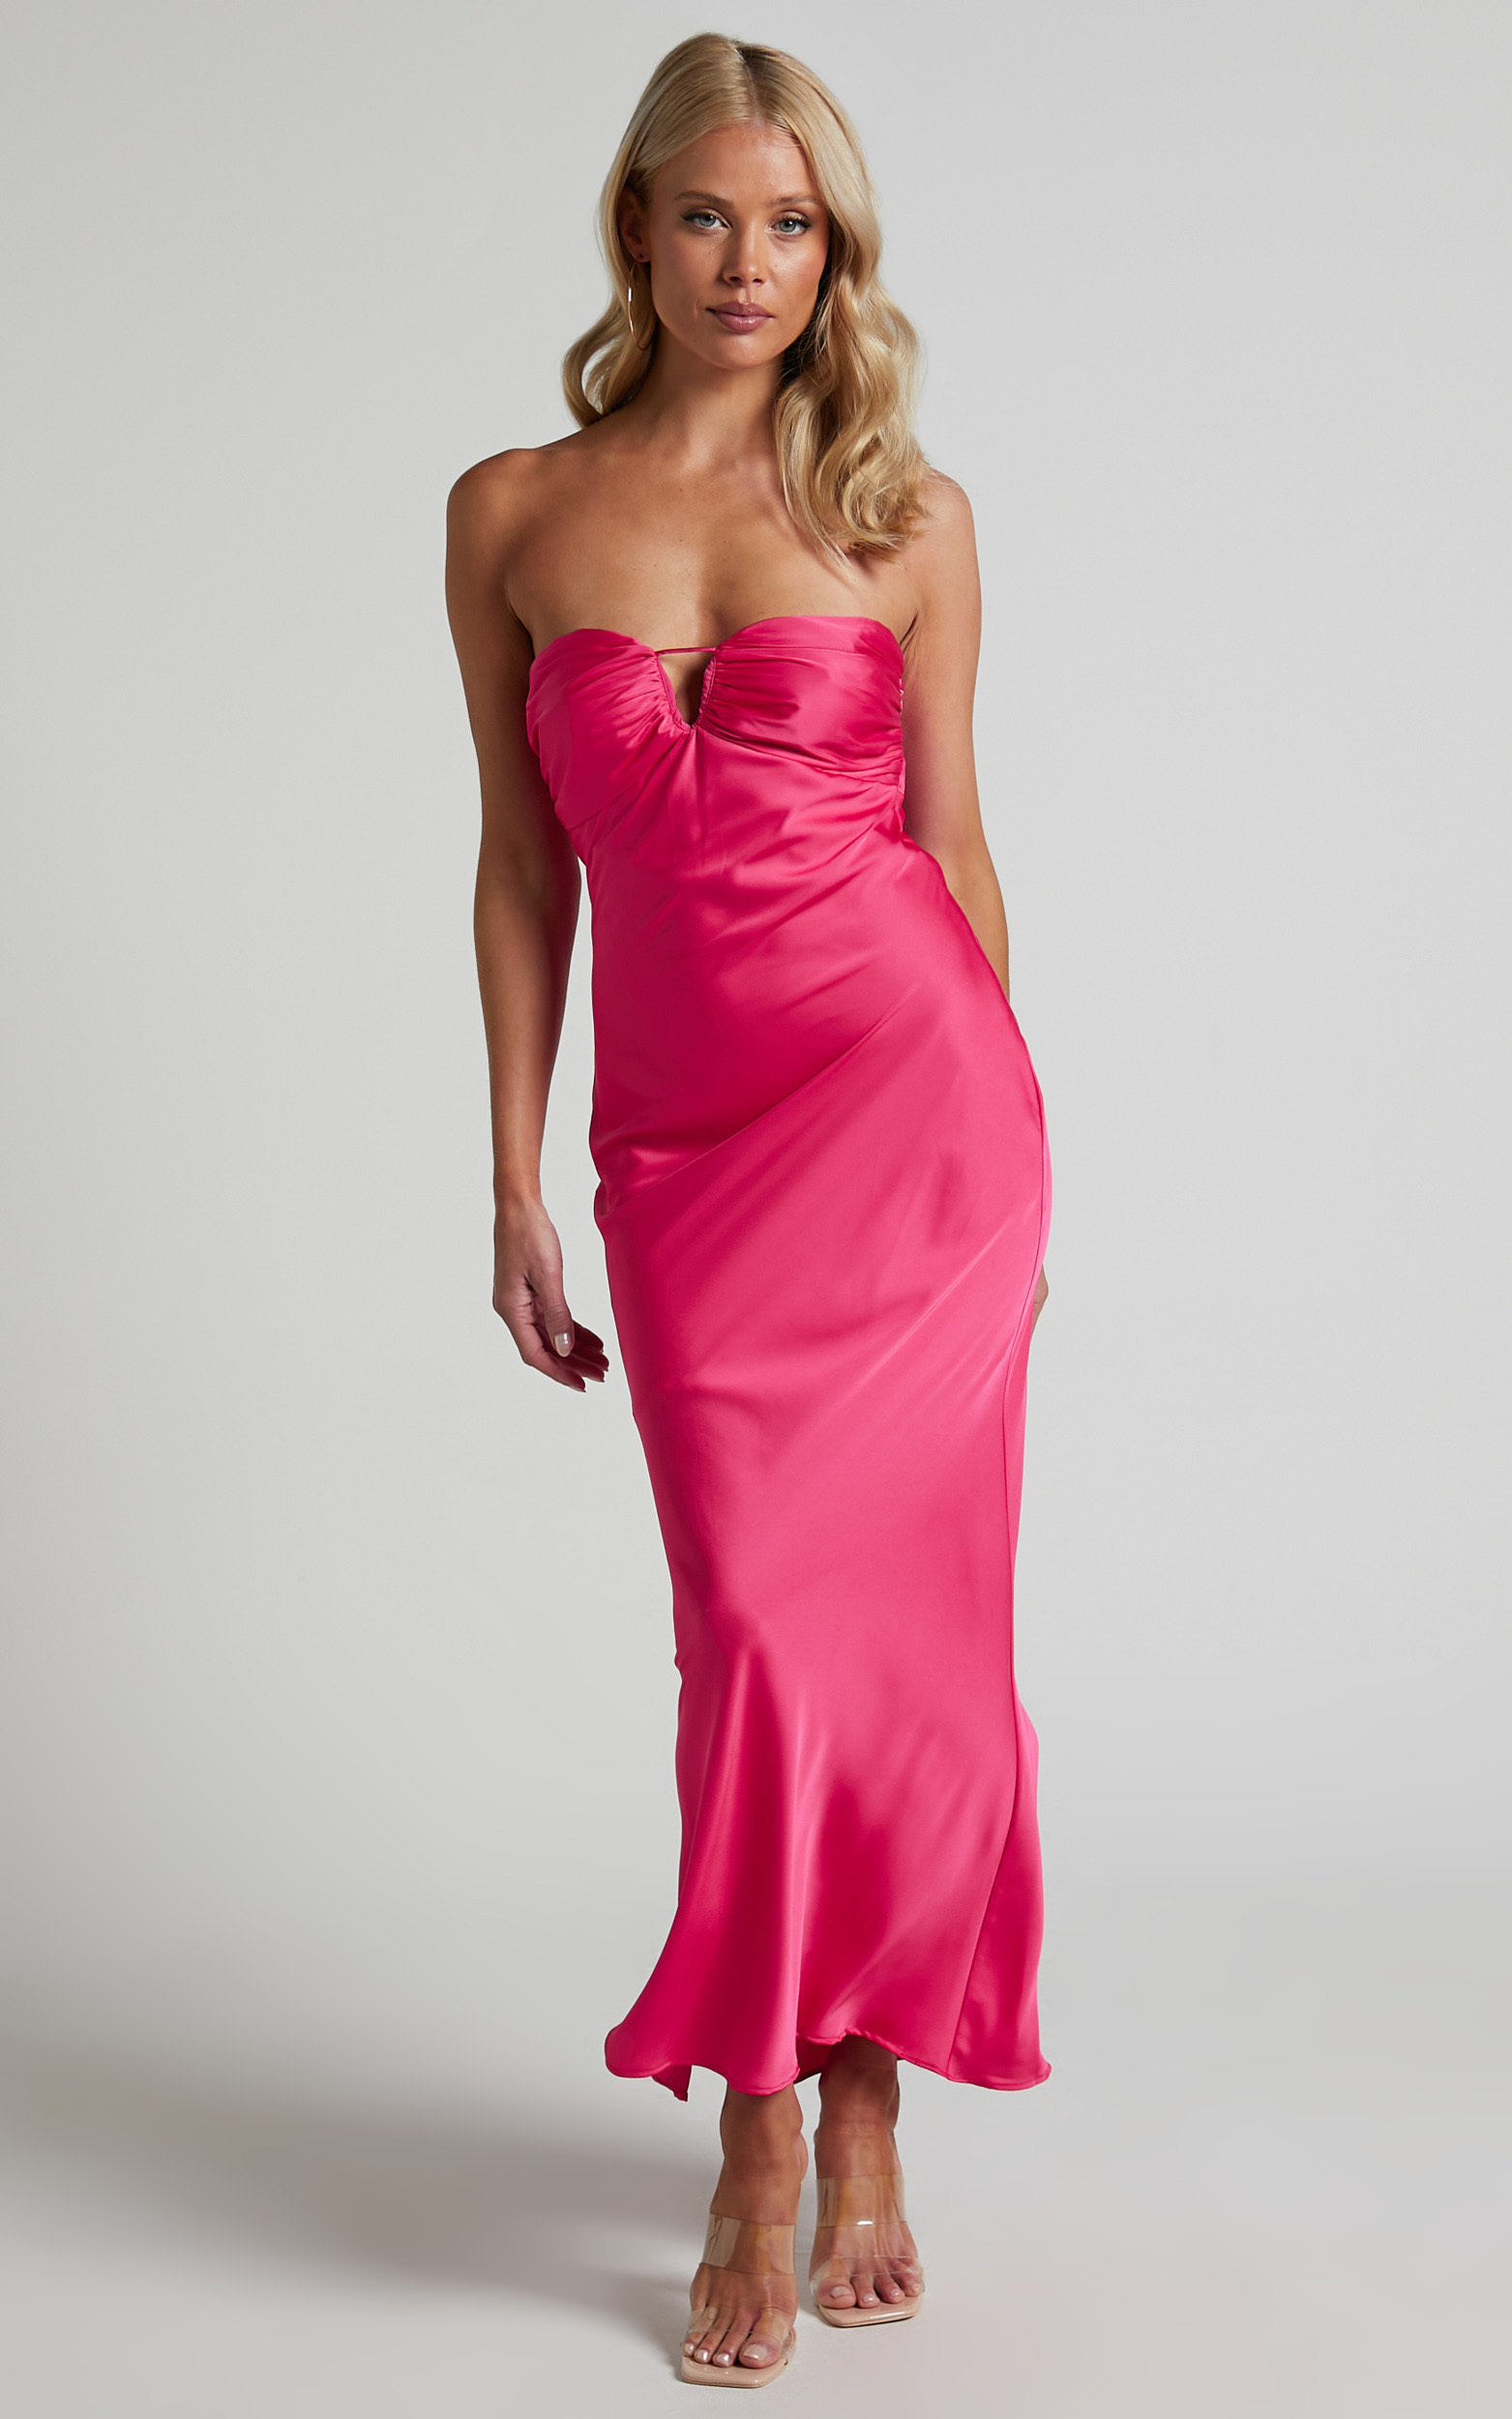 Raya Keyhole Cut Out Sweetheart Strapless Midi Dress in Hot Pink - 06, PNK1, hi-res image number null